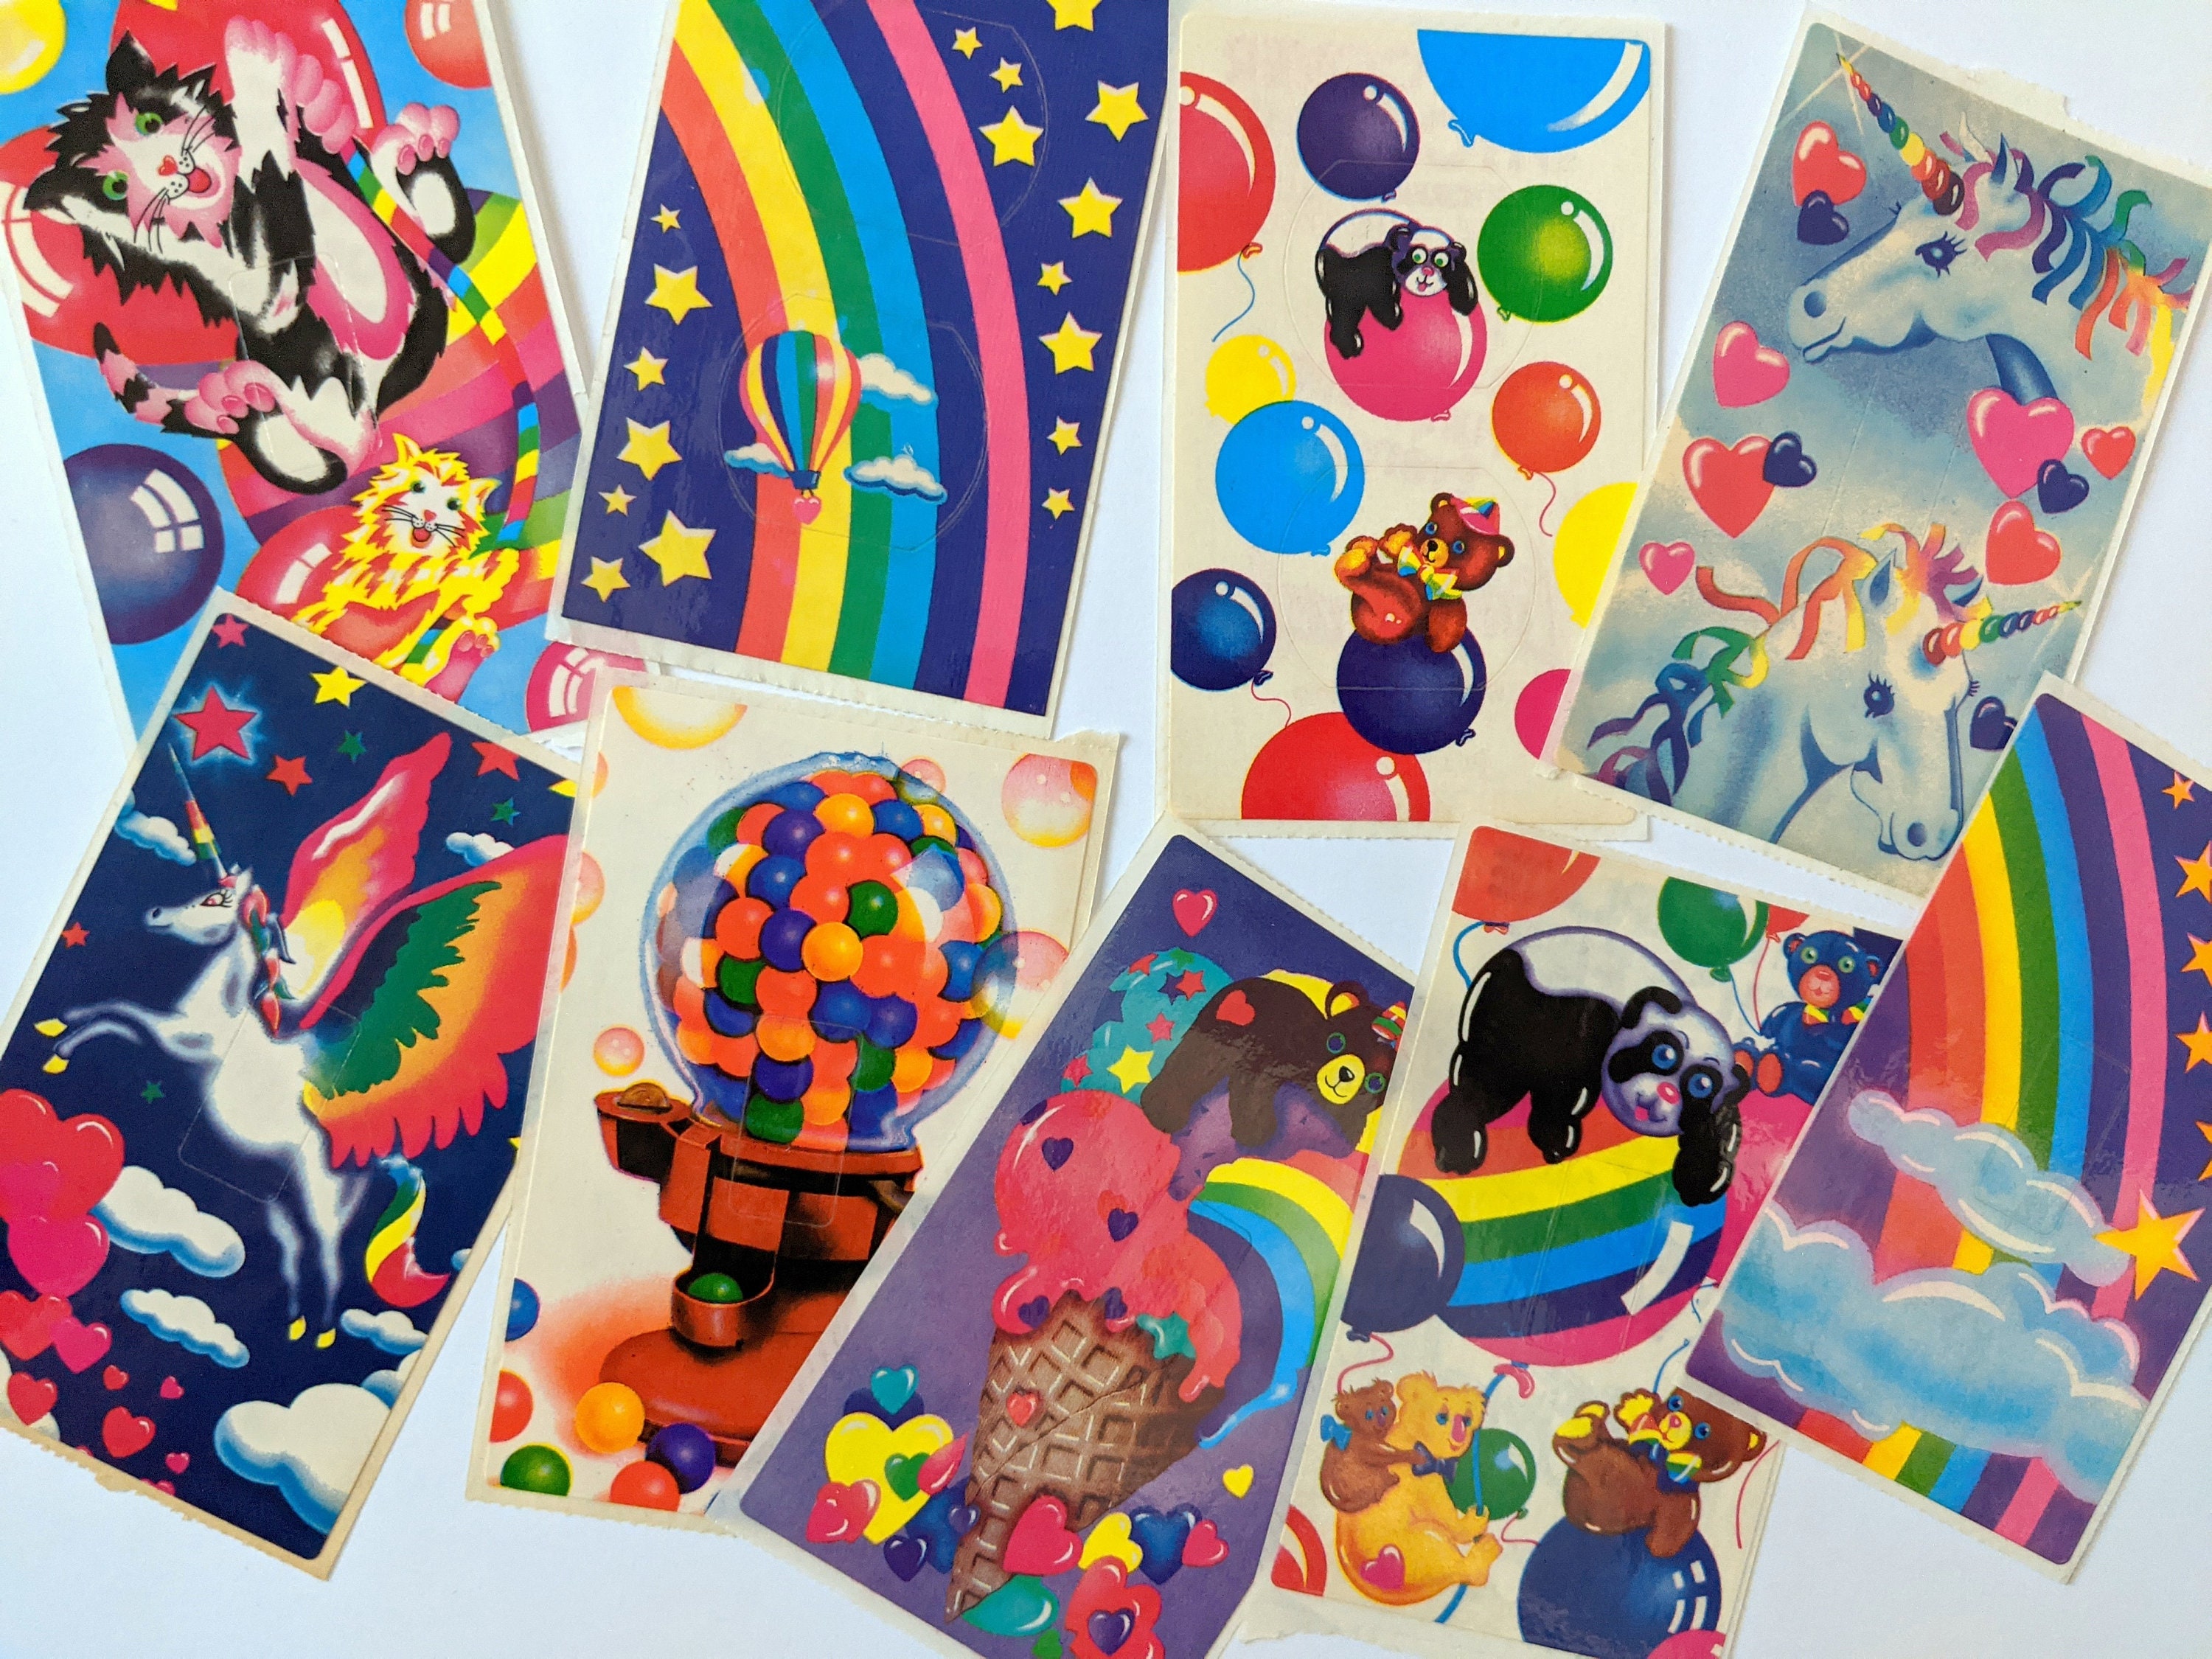 One Early 80s Original NOS Lisa Frank Light Switch and Electric Outlet  Plate Cover Stickers 